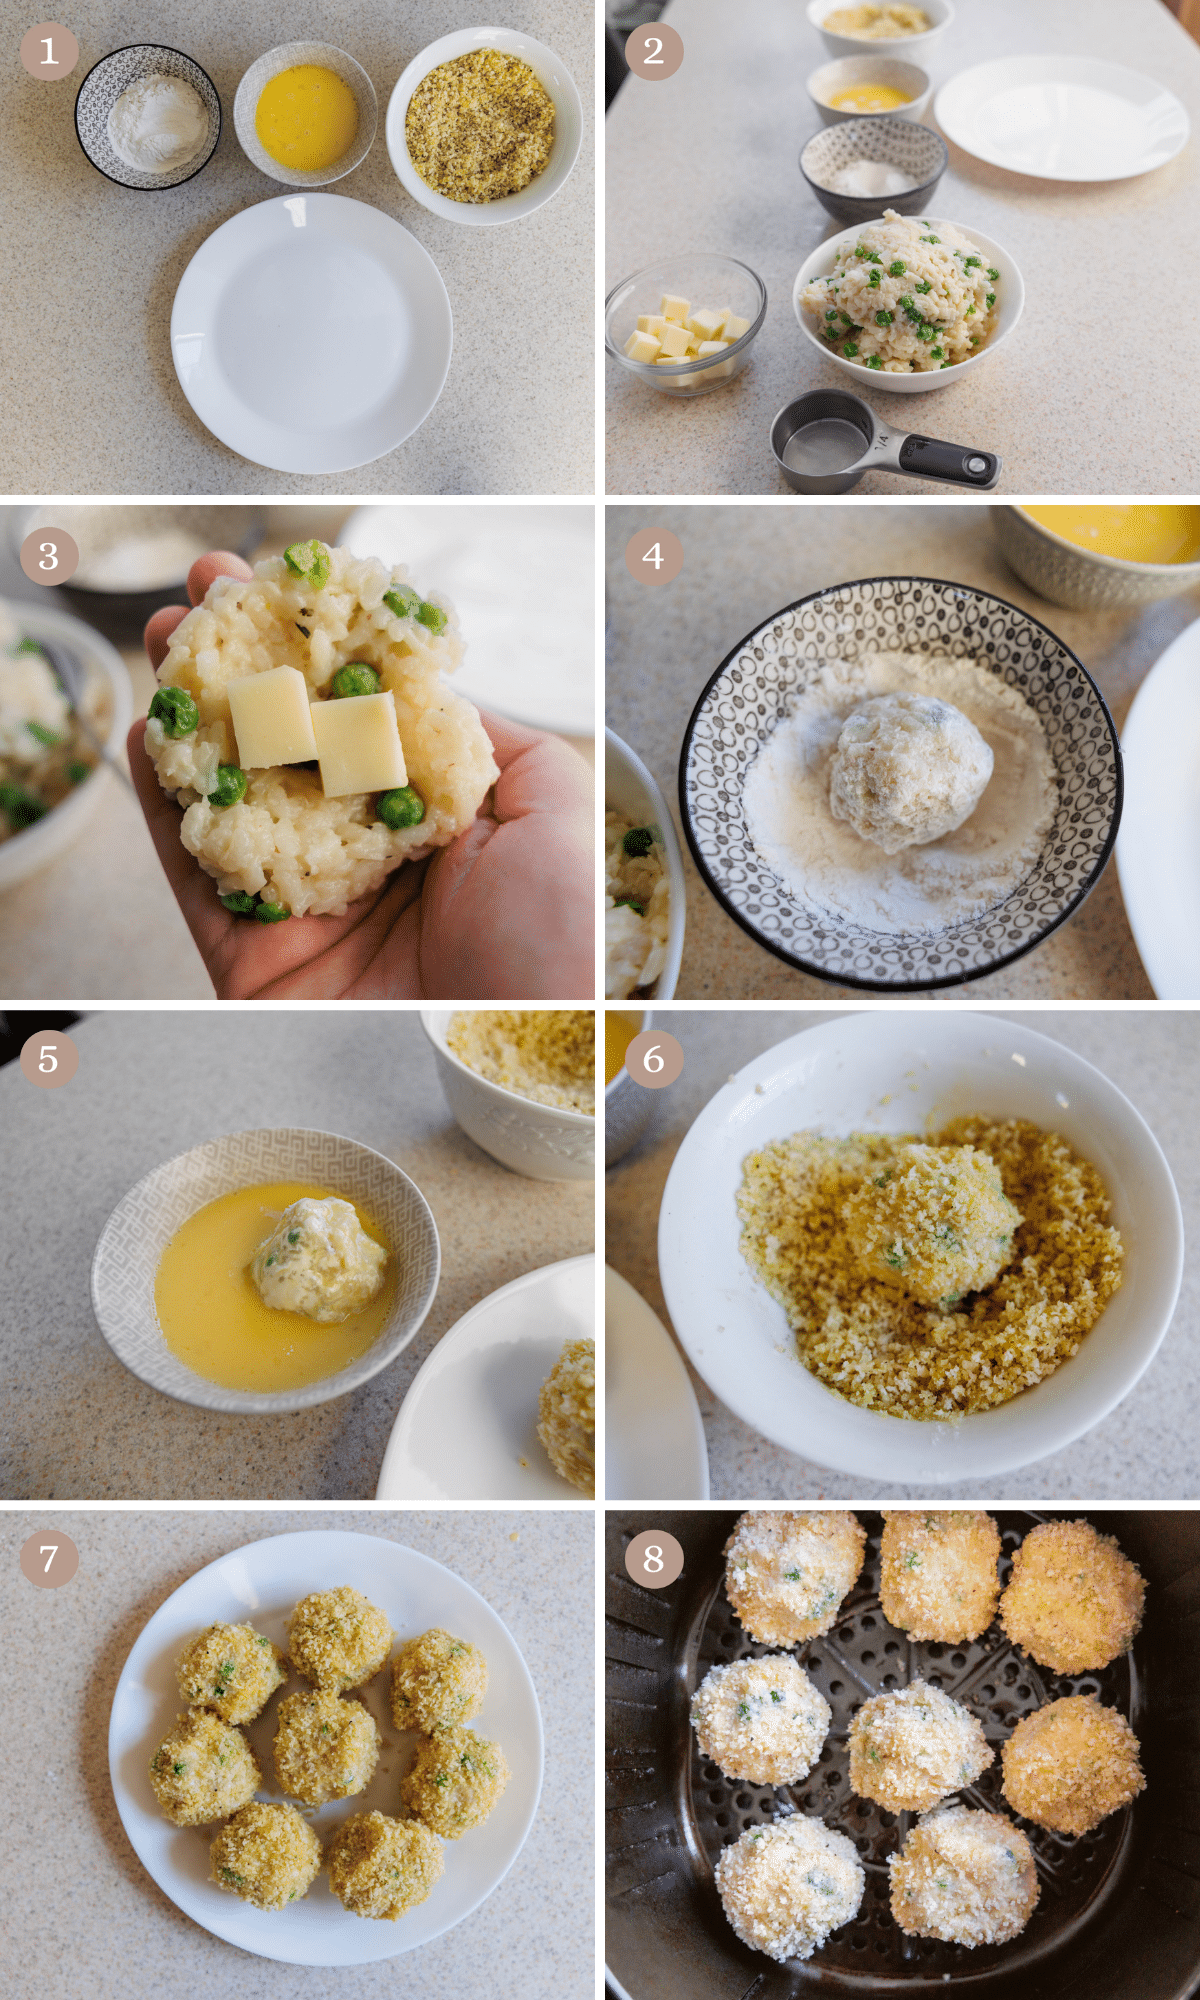 Step by step images showing the recipe directions.